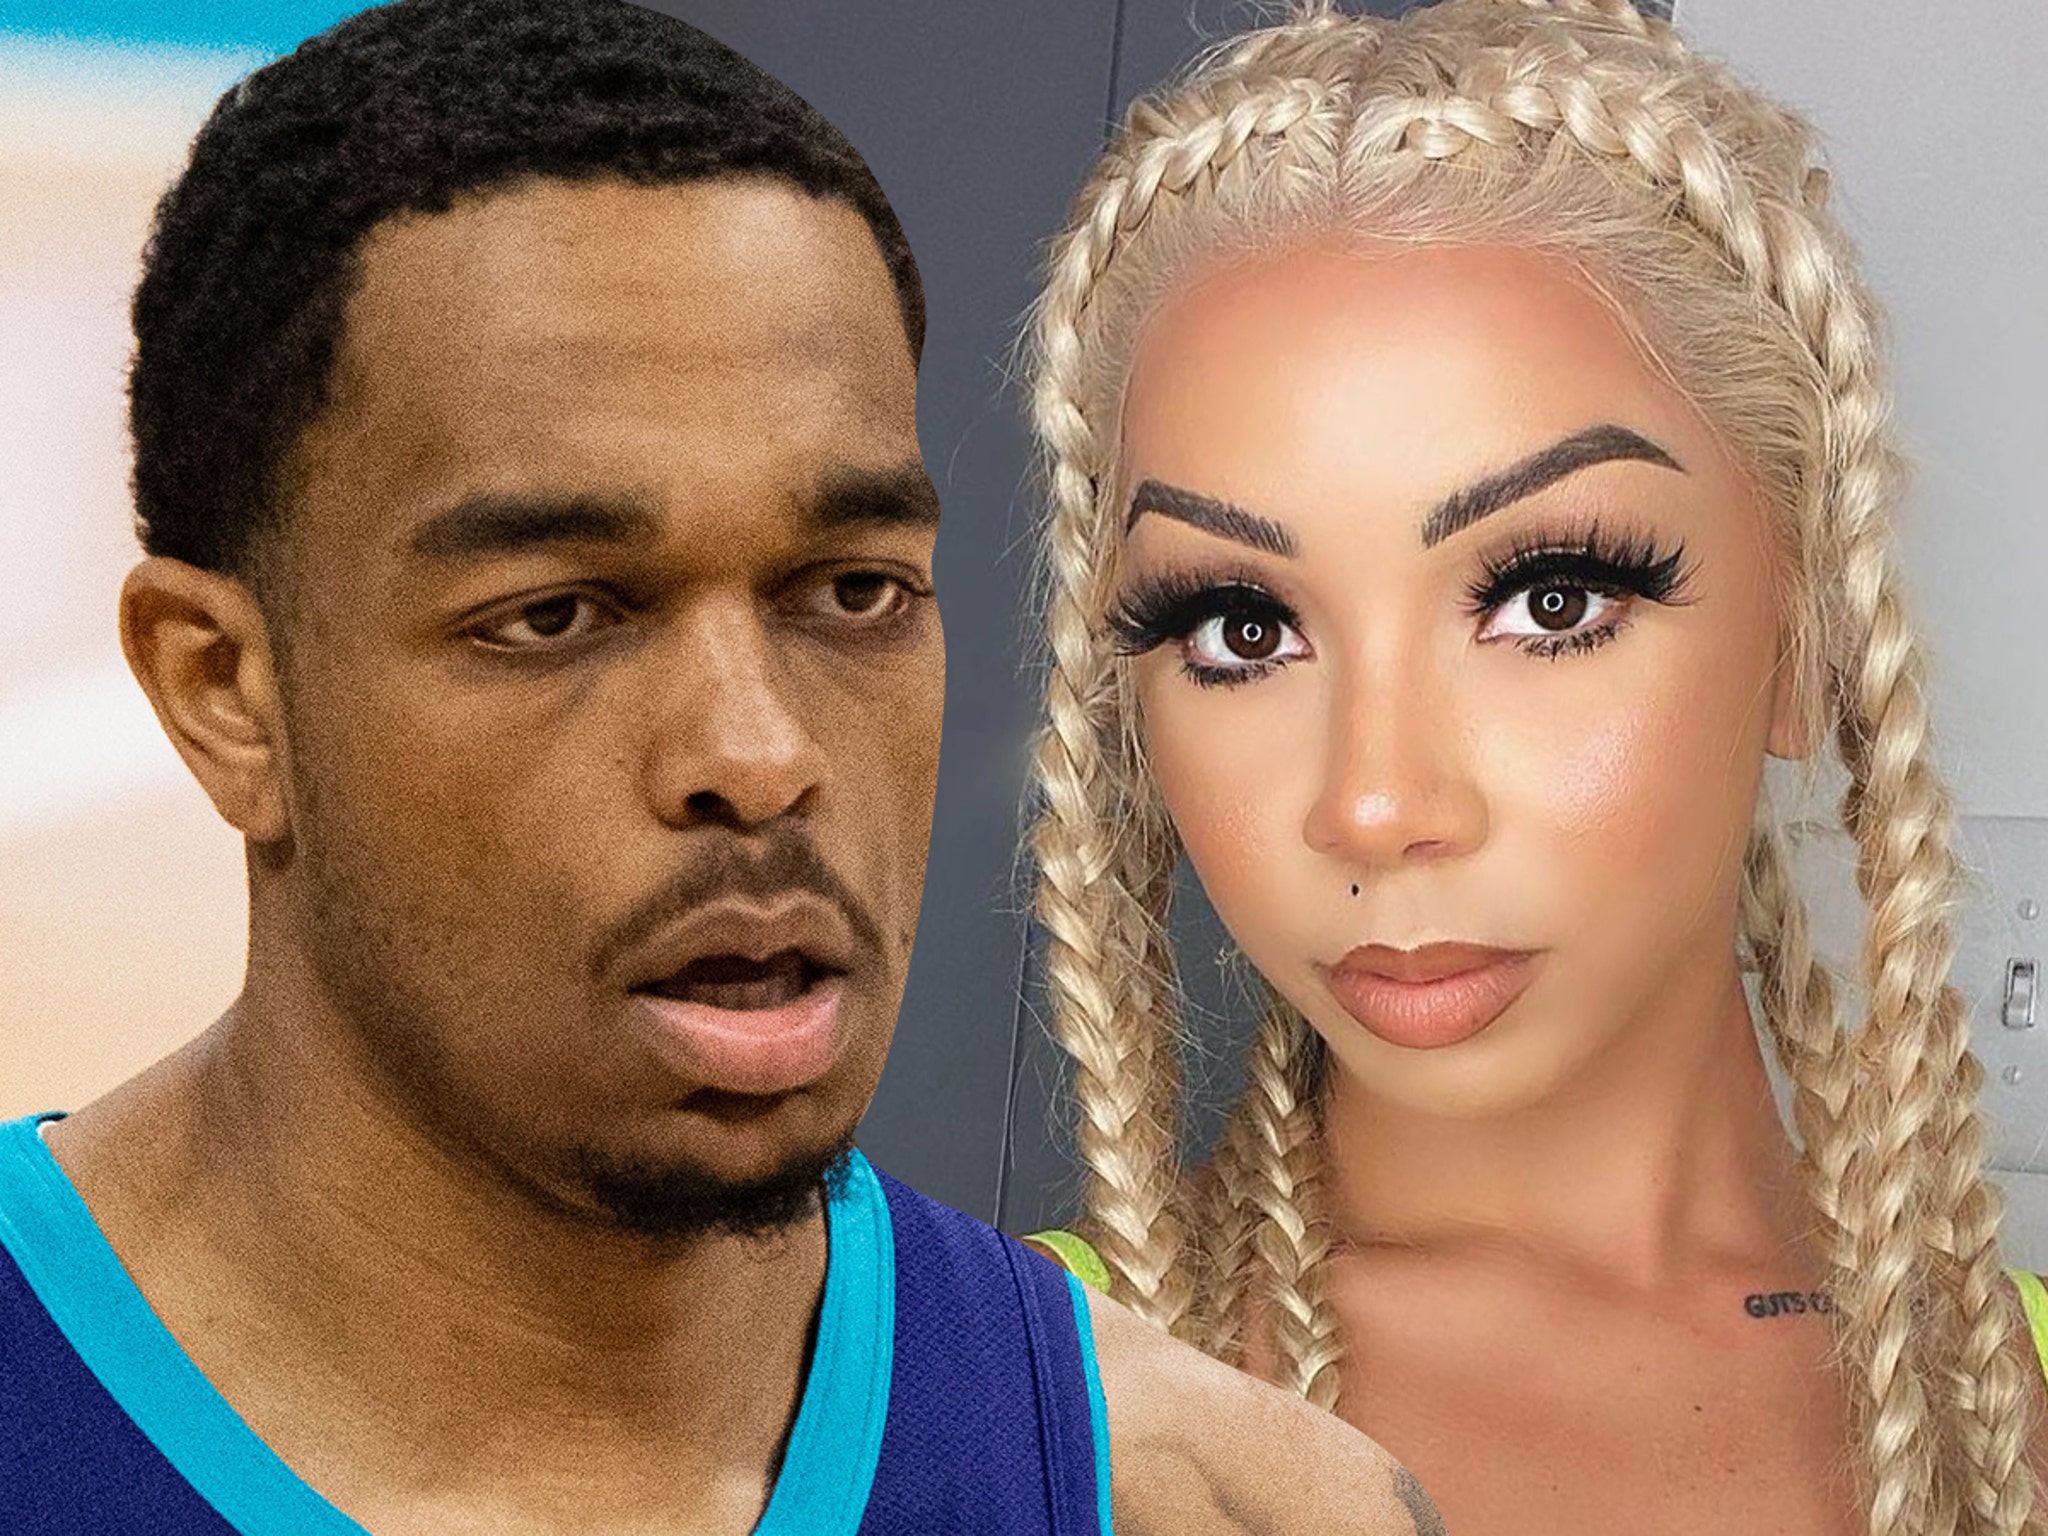 Brittany Renner Reportedly Pregnant By NBA Rookie PJ Washington